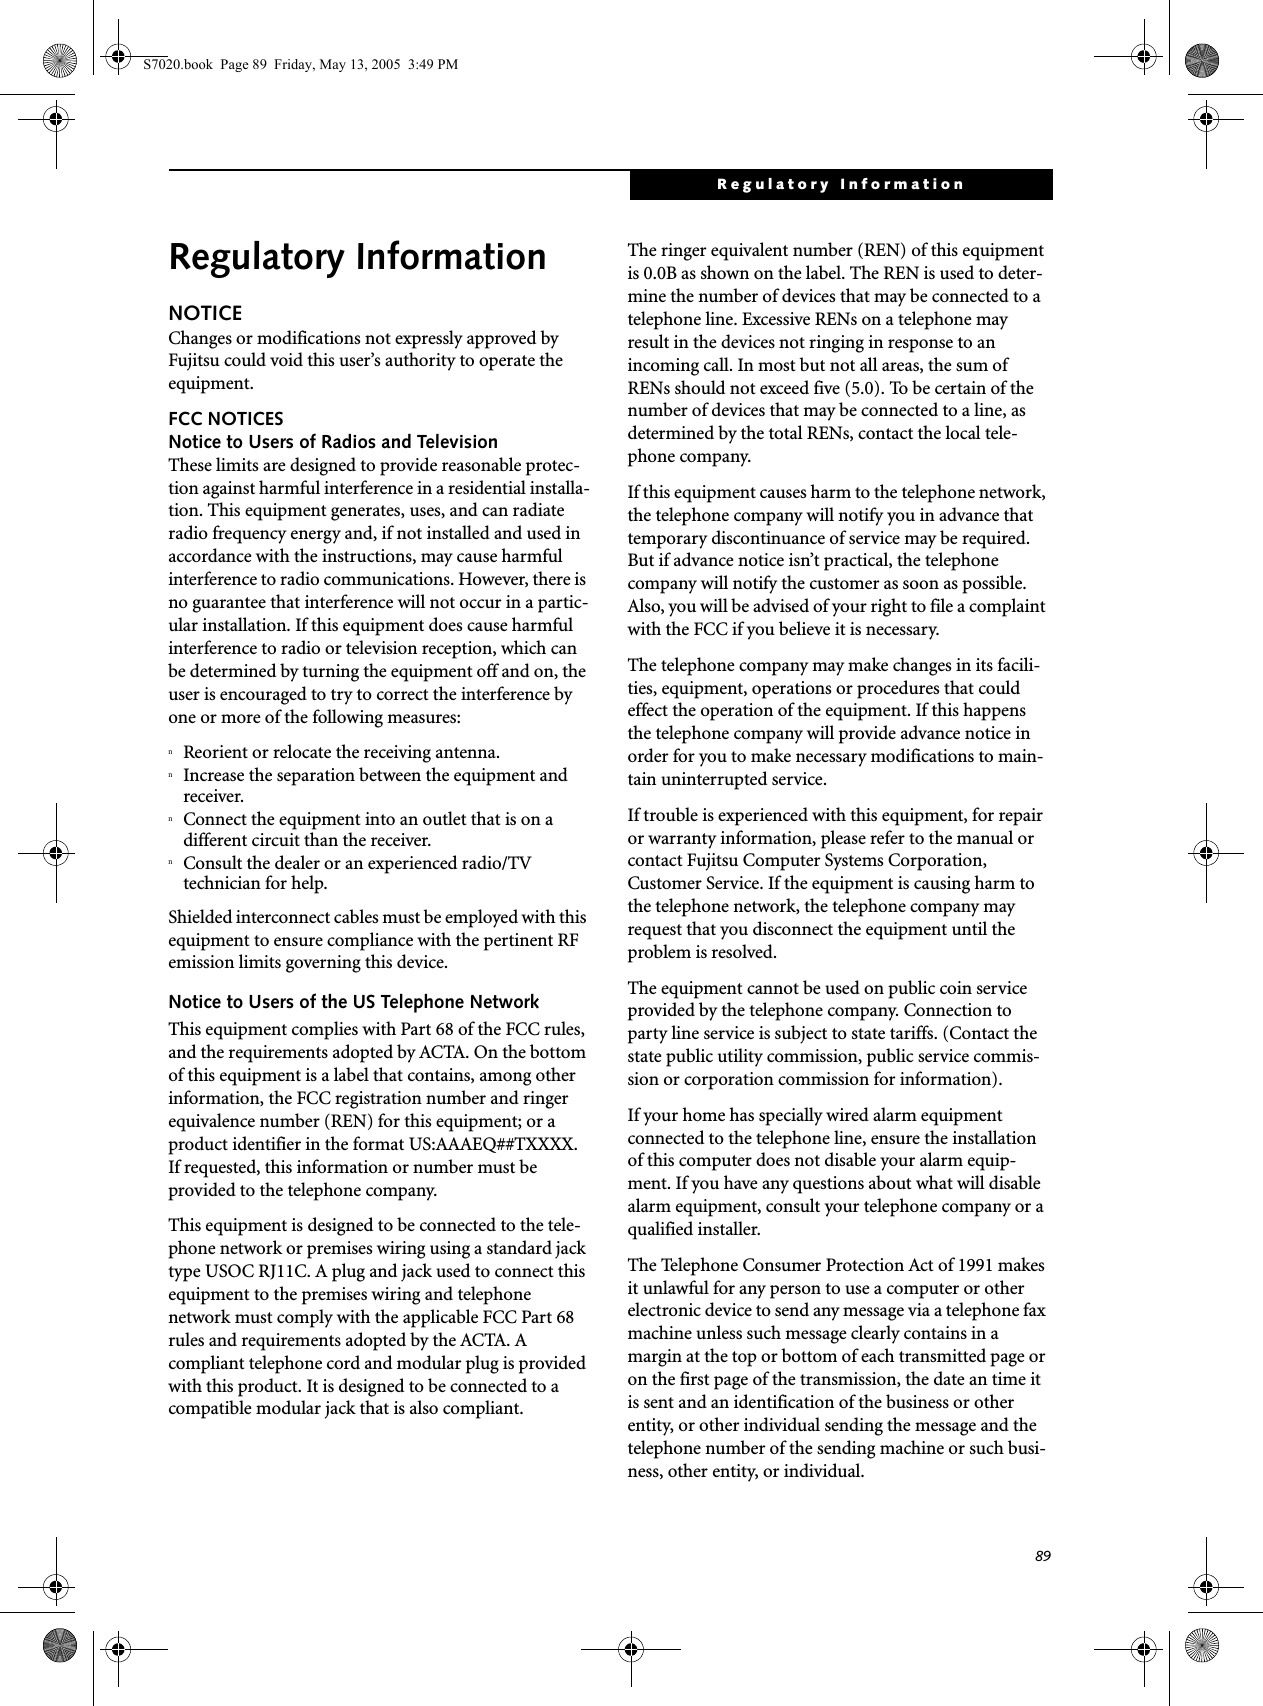 89Regulatory InformationRegulatory InformationNOTICEChanges or modifications not expressly approved by Fujitsu could void this user’s authority to operate the equipment.FCC NOTICESNotice to Users of Radios and TelevisionThese limits are designed to provide reasonable protec-tion against harmful interference in a residential installa-tion. This equipment generates, uses, and can radiate radio frequency energy and, if not installed and used in accordance with the instructions, may cause harmful interference to radio communications. However, there is no guarantee that interference will not occur in a partic-ular installation. If this equipment does cause harmful interference to radio or television reception, which can be determined by turning the equipment off and on, the user is encouraged to try to correct the interference by one or more of the following measures:nReorient or relocate the receiving antenna.nIncrease the separation between the equipment and receiver.nConnect the equipment into an outlet that is on a different circuit than the receiver.nConsult the dealer or an experienced radio/TVtechnician for help.Shielded interconnect cables must be employed with this equipment to ensure compliance with the pertinent RF emission limits governing this device. Notice to Users of the US Telephone NetworkThis equipment complies with Part 68 of the FCC rules, and the requirements adopted by ACTA. On the bottom of this equipment is a label that contains, among other information, the FCC registration number and ringer equivalence number (REN) for this equipment; or a product identifier in the format US:AAAEQ##TXXXX. If requested, this information or number must be provided to the telephone company.This equipment is designed to be connected to the tele-phone network or premises wiring using a standard jack type USOC RJ11C. A plug and jack used to connect this equipment to the premises wiring and telephone network must comply with the applicable FCC Part 68 rules and requirements adopted by the ACTA. A compliant telephone cord and modular plug is provided with this product. It is designed to be connected to a compatible modular jack that is also compliant.The ringer equivalent number (REN) of this equipment is 0.0B as shown on the label. The REN is used to deter-mine the number of devices that may be connected to a telephone line. Excessive RENs on a telephone may result in the devices not ringing in response to an incoming call. In most but not all areas, the sum of RENs should not exceed five (5.0). To be certain of the number of devices that may be connected to a line, as determined by the total RENs, contact the local tele-phone company. If this equipment causes harm to the telephone network, the telephone company will notify you in advance that temporary discontinuance of service may be required. But if advance notice isn’t practical, the telephone company will notify the customer as soon as possible. Also, you will be advised of your right to file a complaint with the FCC if you believe it is necessary.The telephone company may make changes in its facili-ties, equipment, operations or procedures that could effect the operation of the equipment. If this happens the telephone company will provide advance notice in order for you to make necessary modifications to main-tain uninterrupted service. If trouble is experienced with this equipment, for repair or warranty information, please refer to the manual or contact Fujitsu Computer Systems Corporation, Customer Service. If the equipment is causing harm to the telephone network, the telephone company may request that you disconnect the equipment until the problem is resolved.The equipment cannot be used on public coin service provided by the telephone company. Connection to party line service is subject to state tariffs. (Contact the state public utility commission, public service commis-sion or corporation commission for information). If your home has specially wired alarm equipment connected to the telephone line, ensure the installation of this computer does not disable your alarm equip-ment. If you have any questions about what will disable alarm equipment, consult your telephone company or a qualified installer.The Telephone Consumer Protection Act of 1991 makes it unlawful for any person to use a computer or other electronic device to send any message via a telephone fax machine unless such message clearly contains in a margin at the top or bottom of each transmitted page or on the first page of the transmission, the date an time it is sent and an identification of the business or other entity, or other individual sending the message and the telephone number of the sending machine or such busi-ness, other entity, or individual.S7020.book  Page 89  Friday, May 13, 2005  3:49 PM